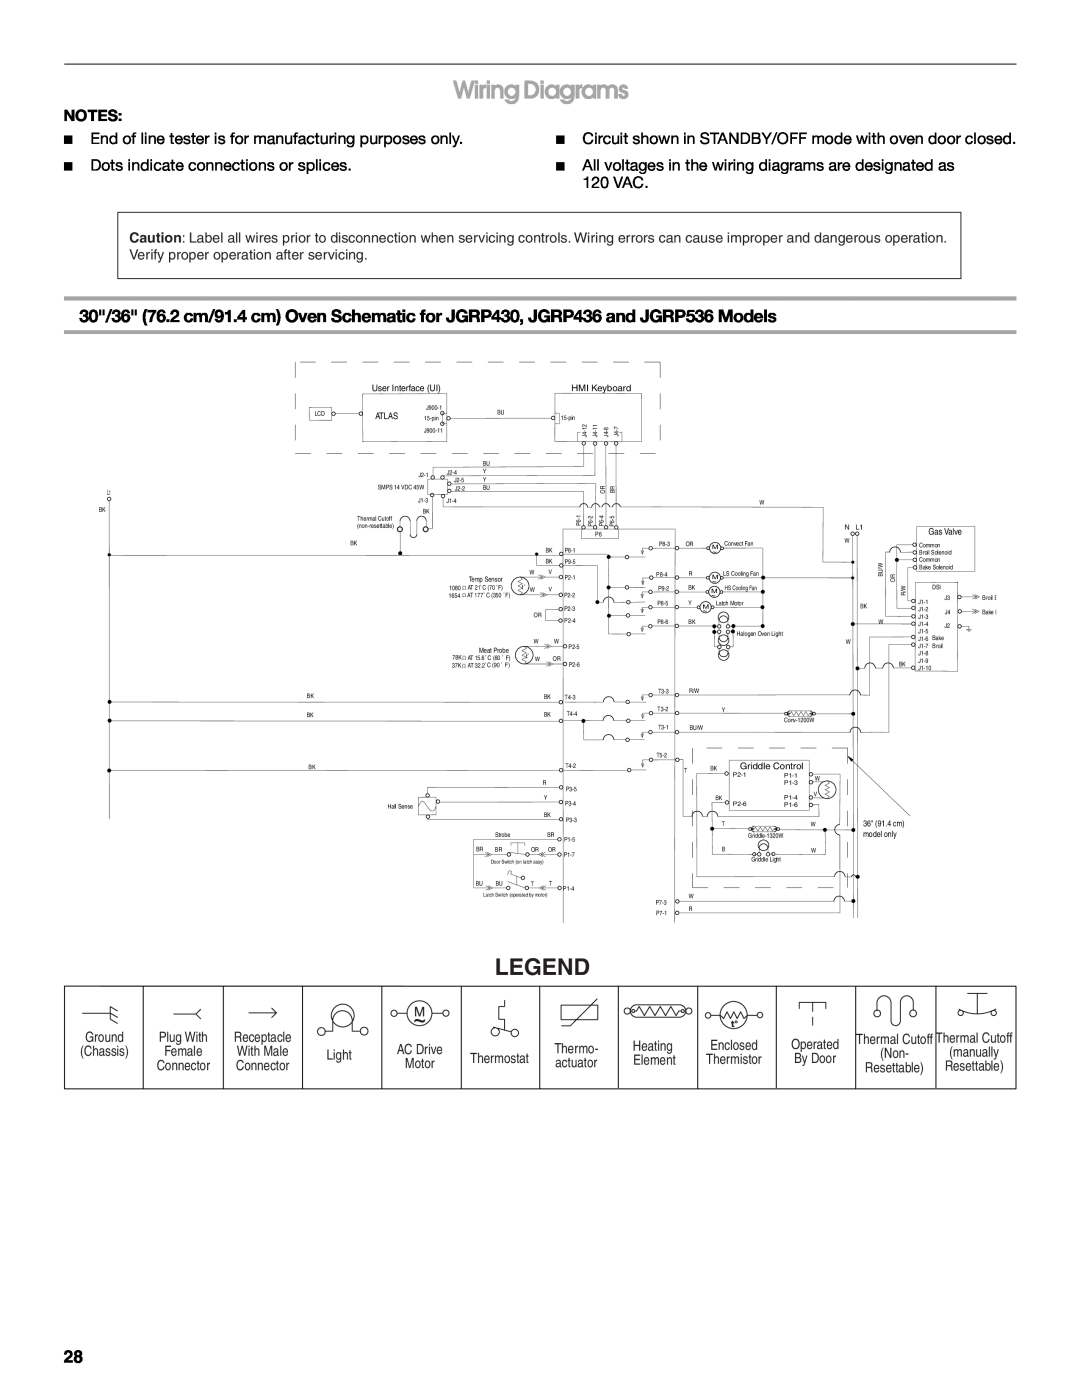 Jenn-Air W10394575A installation instructions Wiring Diagrams, Thermostat, Enclosed Thermistor, Operated By Door 